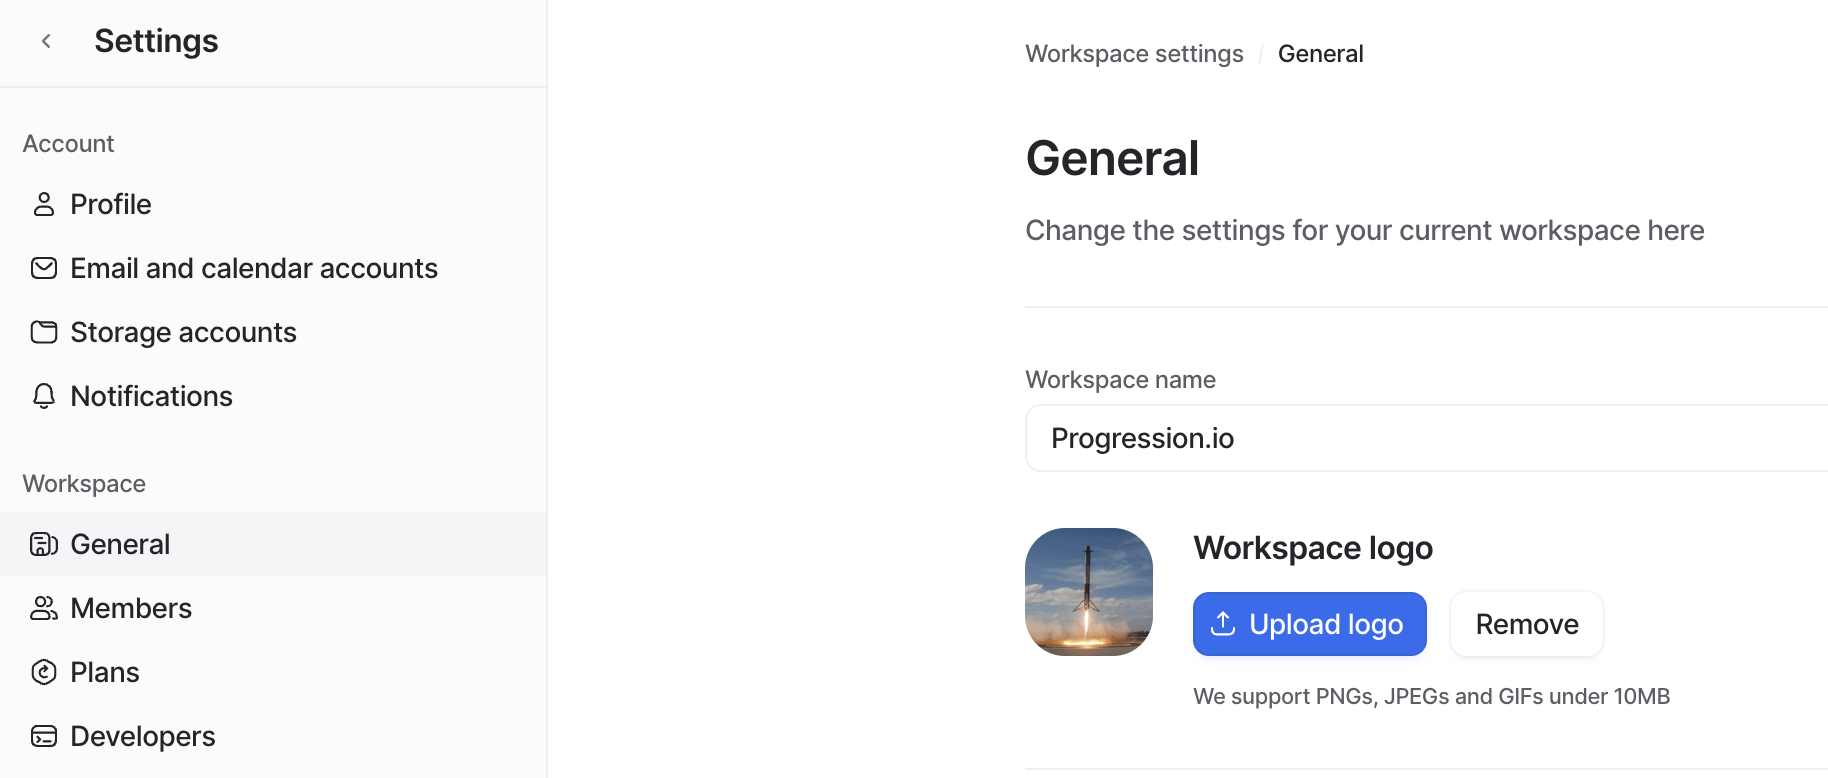 General workspace settings page showing options to update workspace name and logo